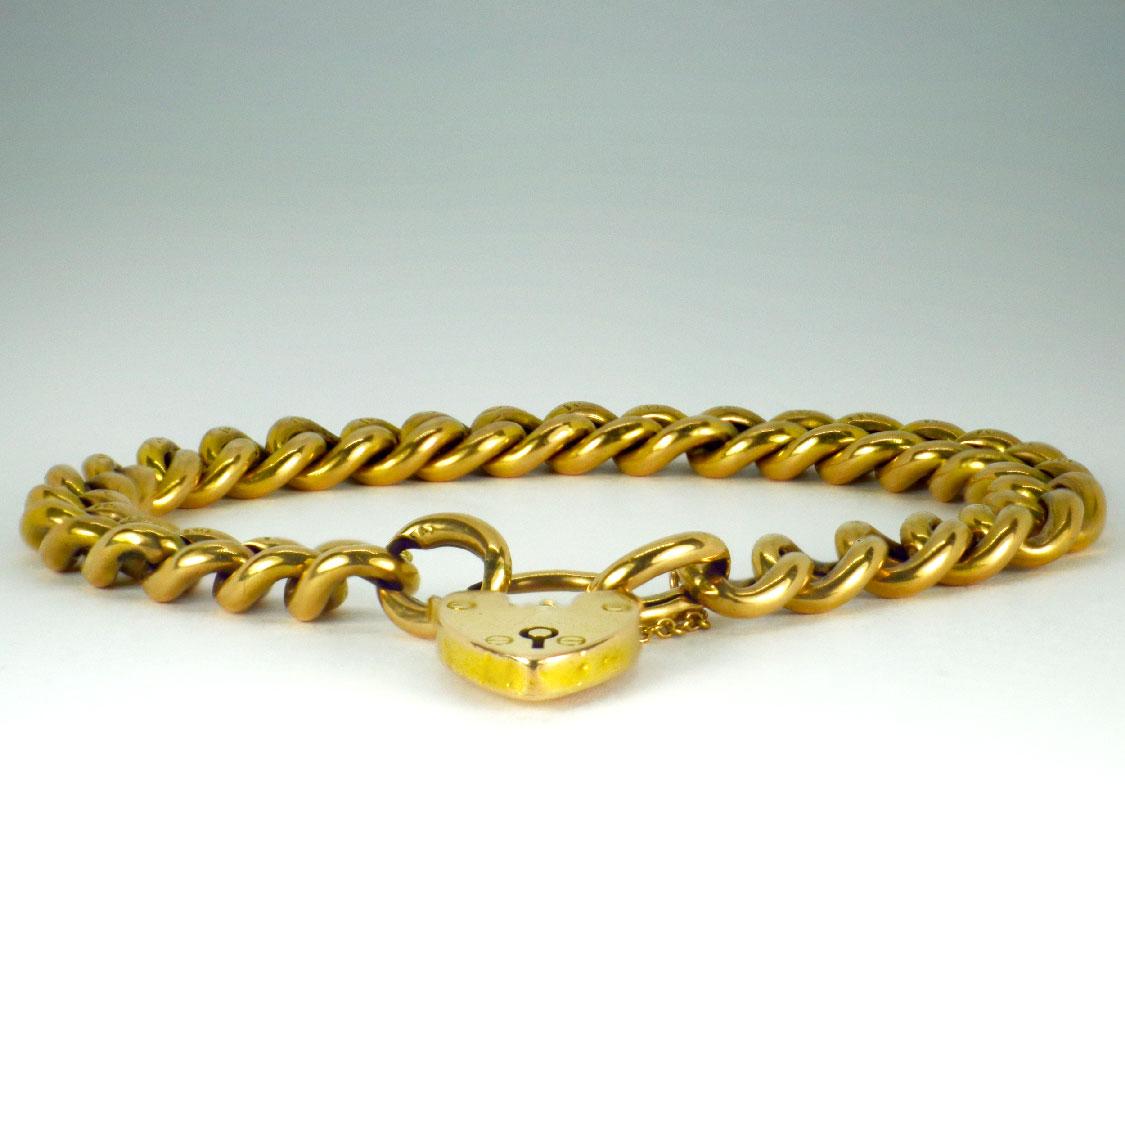 A 15 karat (15K) yellow gold bracelet designed as a curb link chain with padlock heart closure and safety chain. Each link stamped ‘15’ for 15 karat gold, the padlock stamped 15ct with maker’s mark B&S. 8.5” long.

Dimensions: 21.75 x 0.9 cm
Weight: